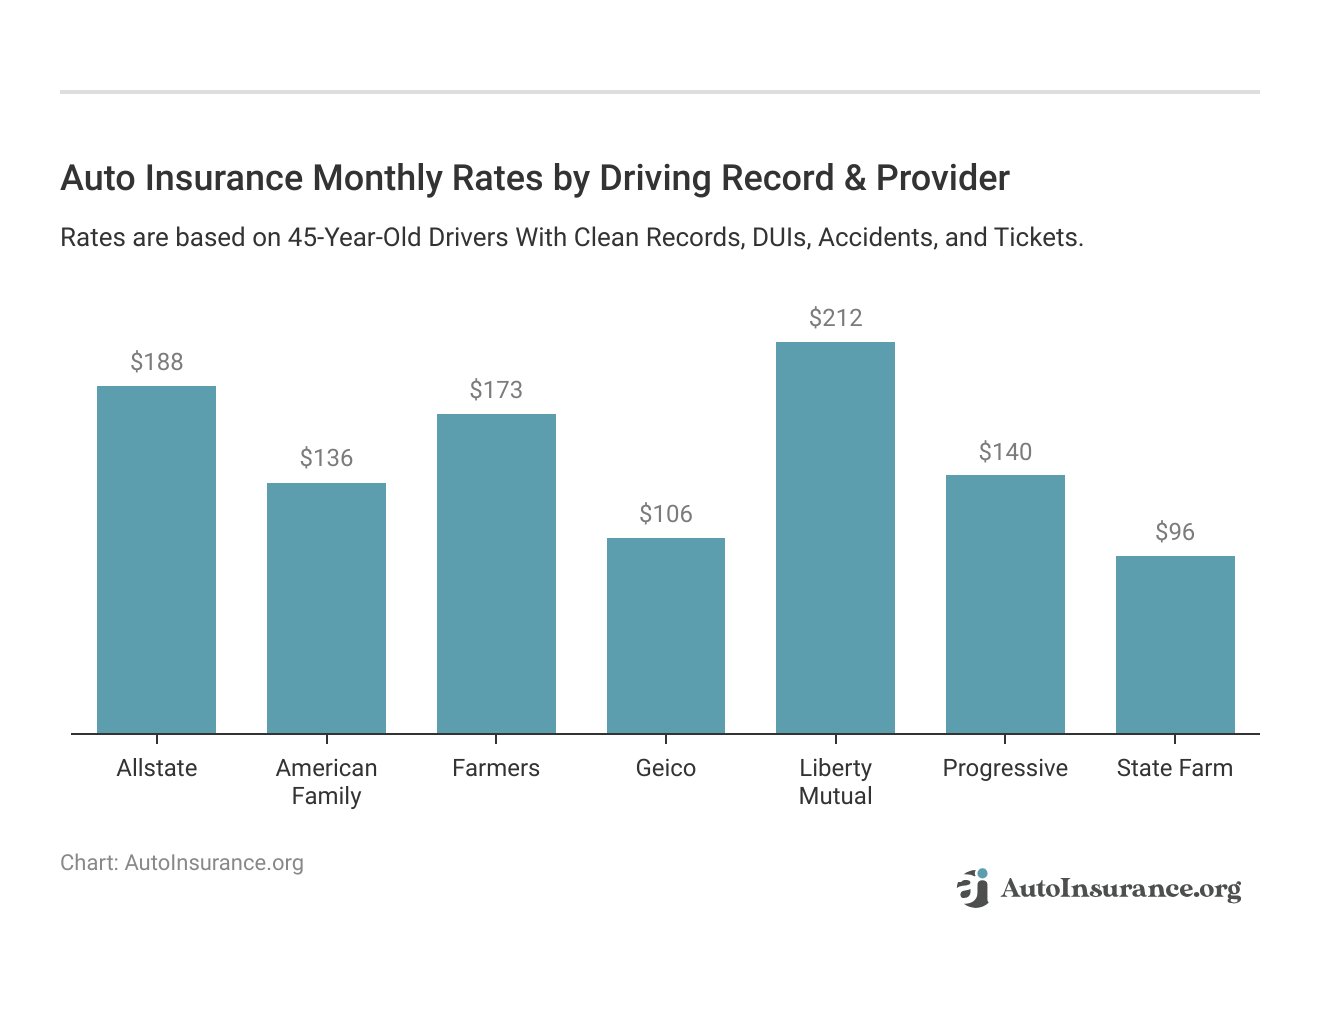 <h3>Auto Insurance Monthly Rates by Driving Record & Provider</h3>